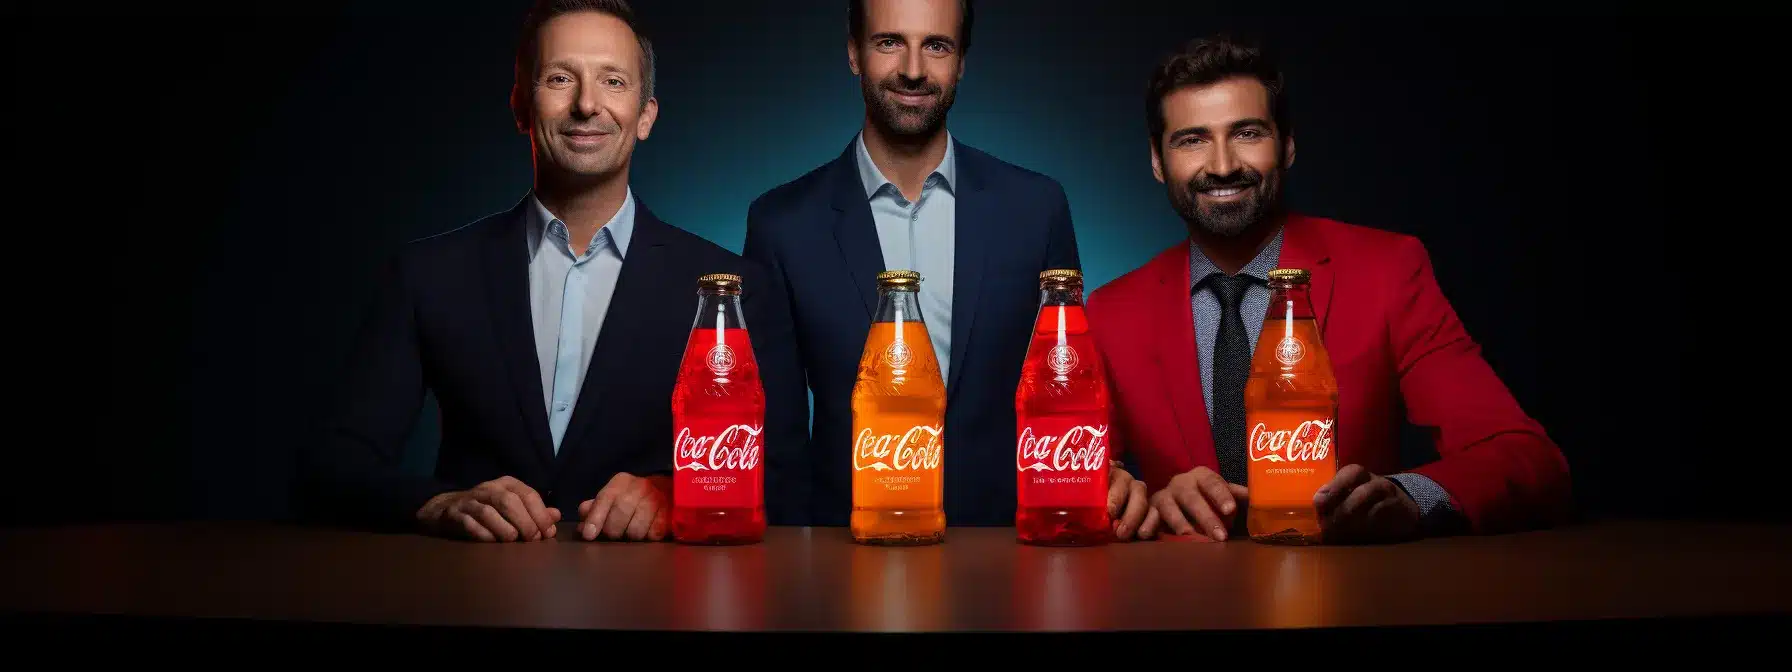 Brand Executives From Successful Companies Like Habib Rouh, Coca-Cola, And Amazon Stand Confidently Together, Representing The Power Of Brand Consistency In A Colorful And Vibrant Display.